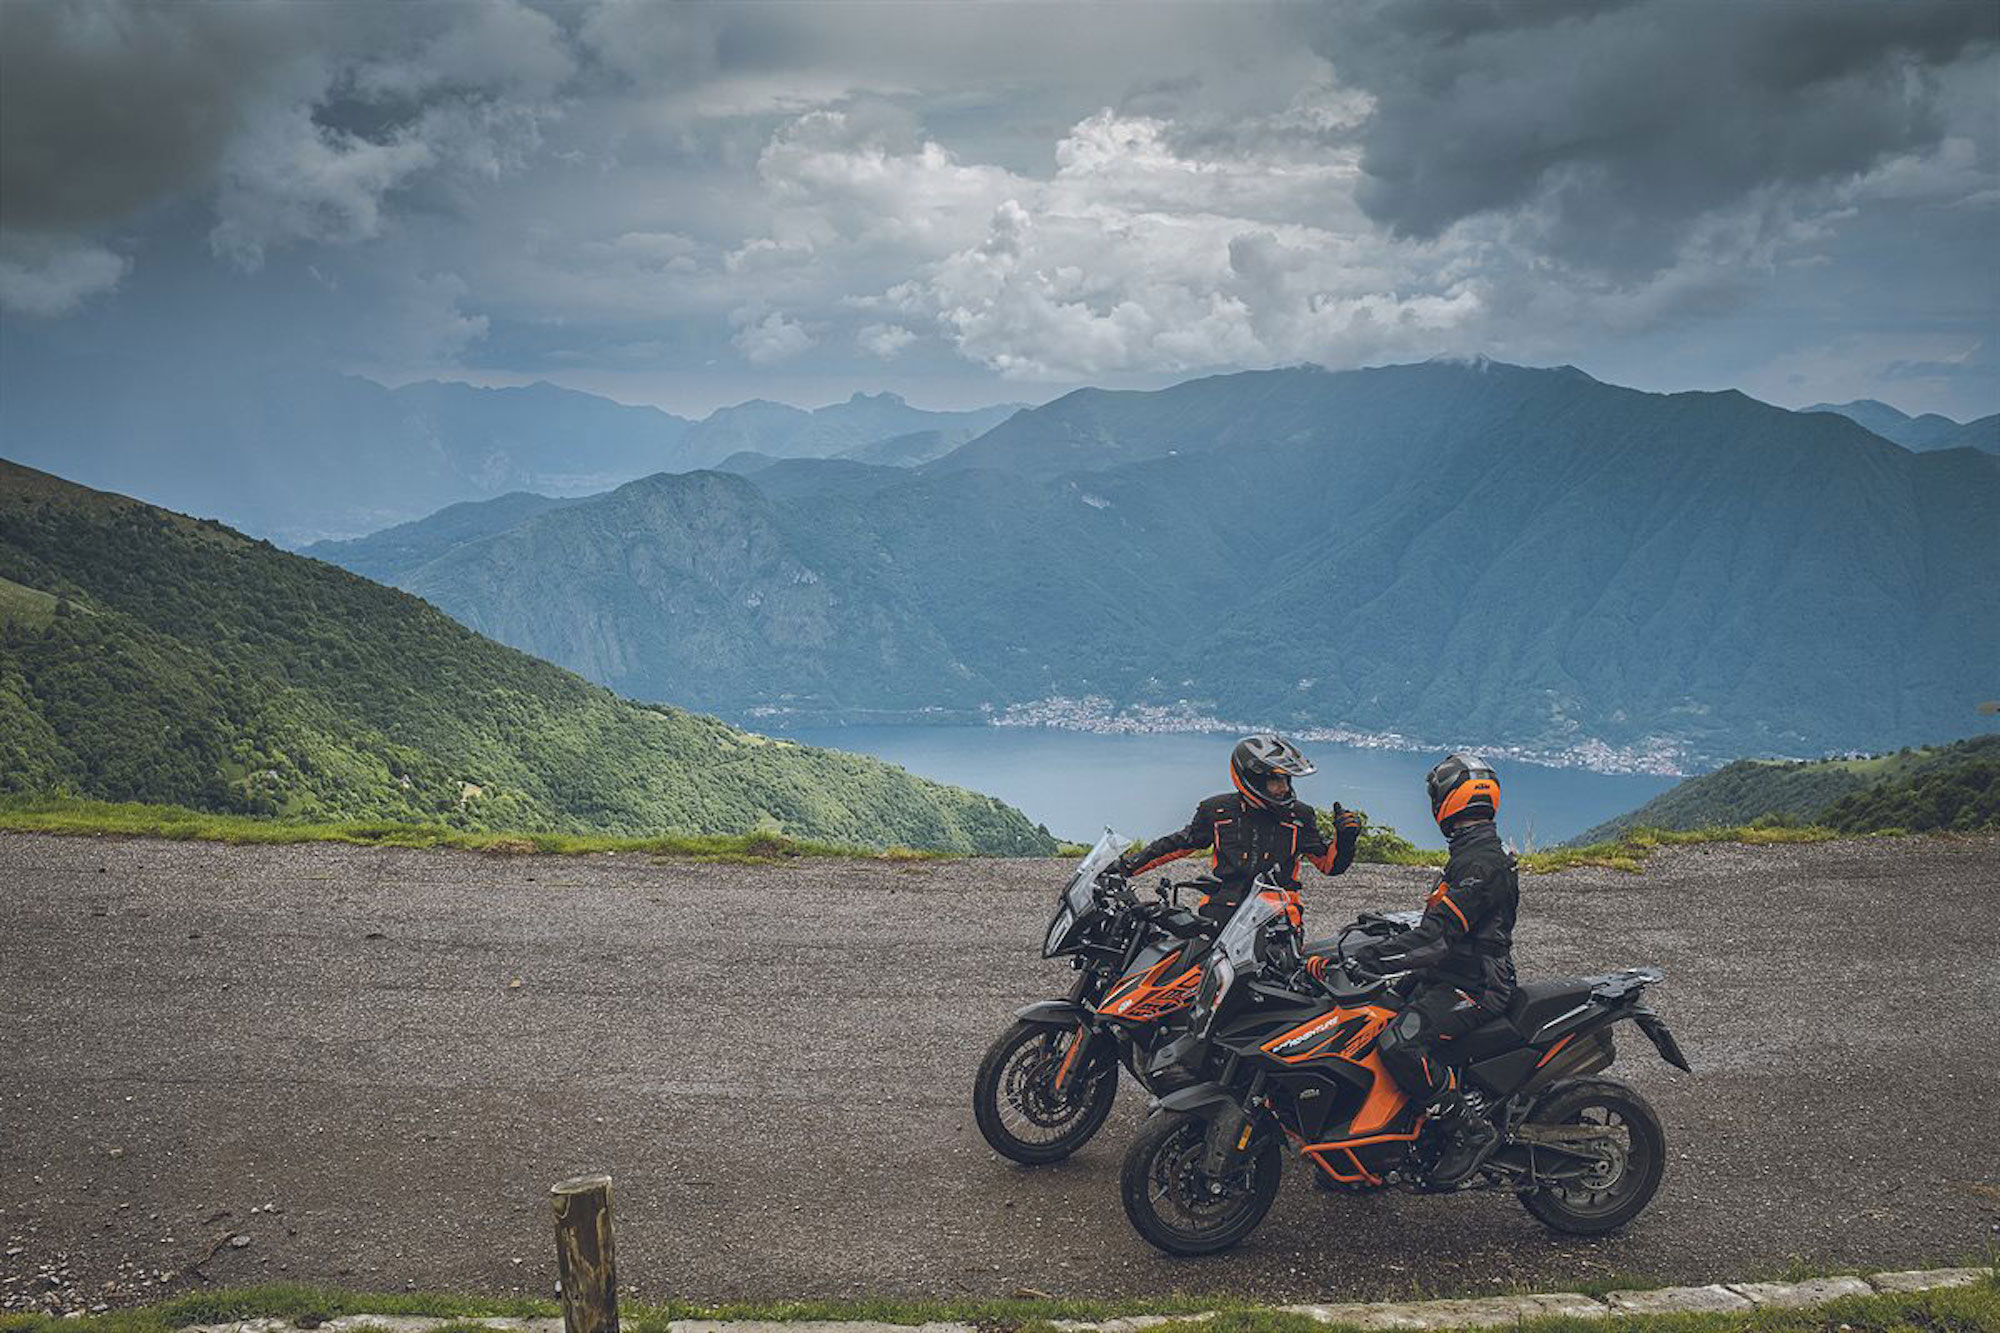 A view of KTM ADVENTURE-inclined motorcycle in the bid for a 1,000km challenge in the 2022 KTM World Adventure Week